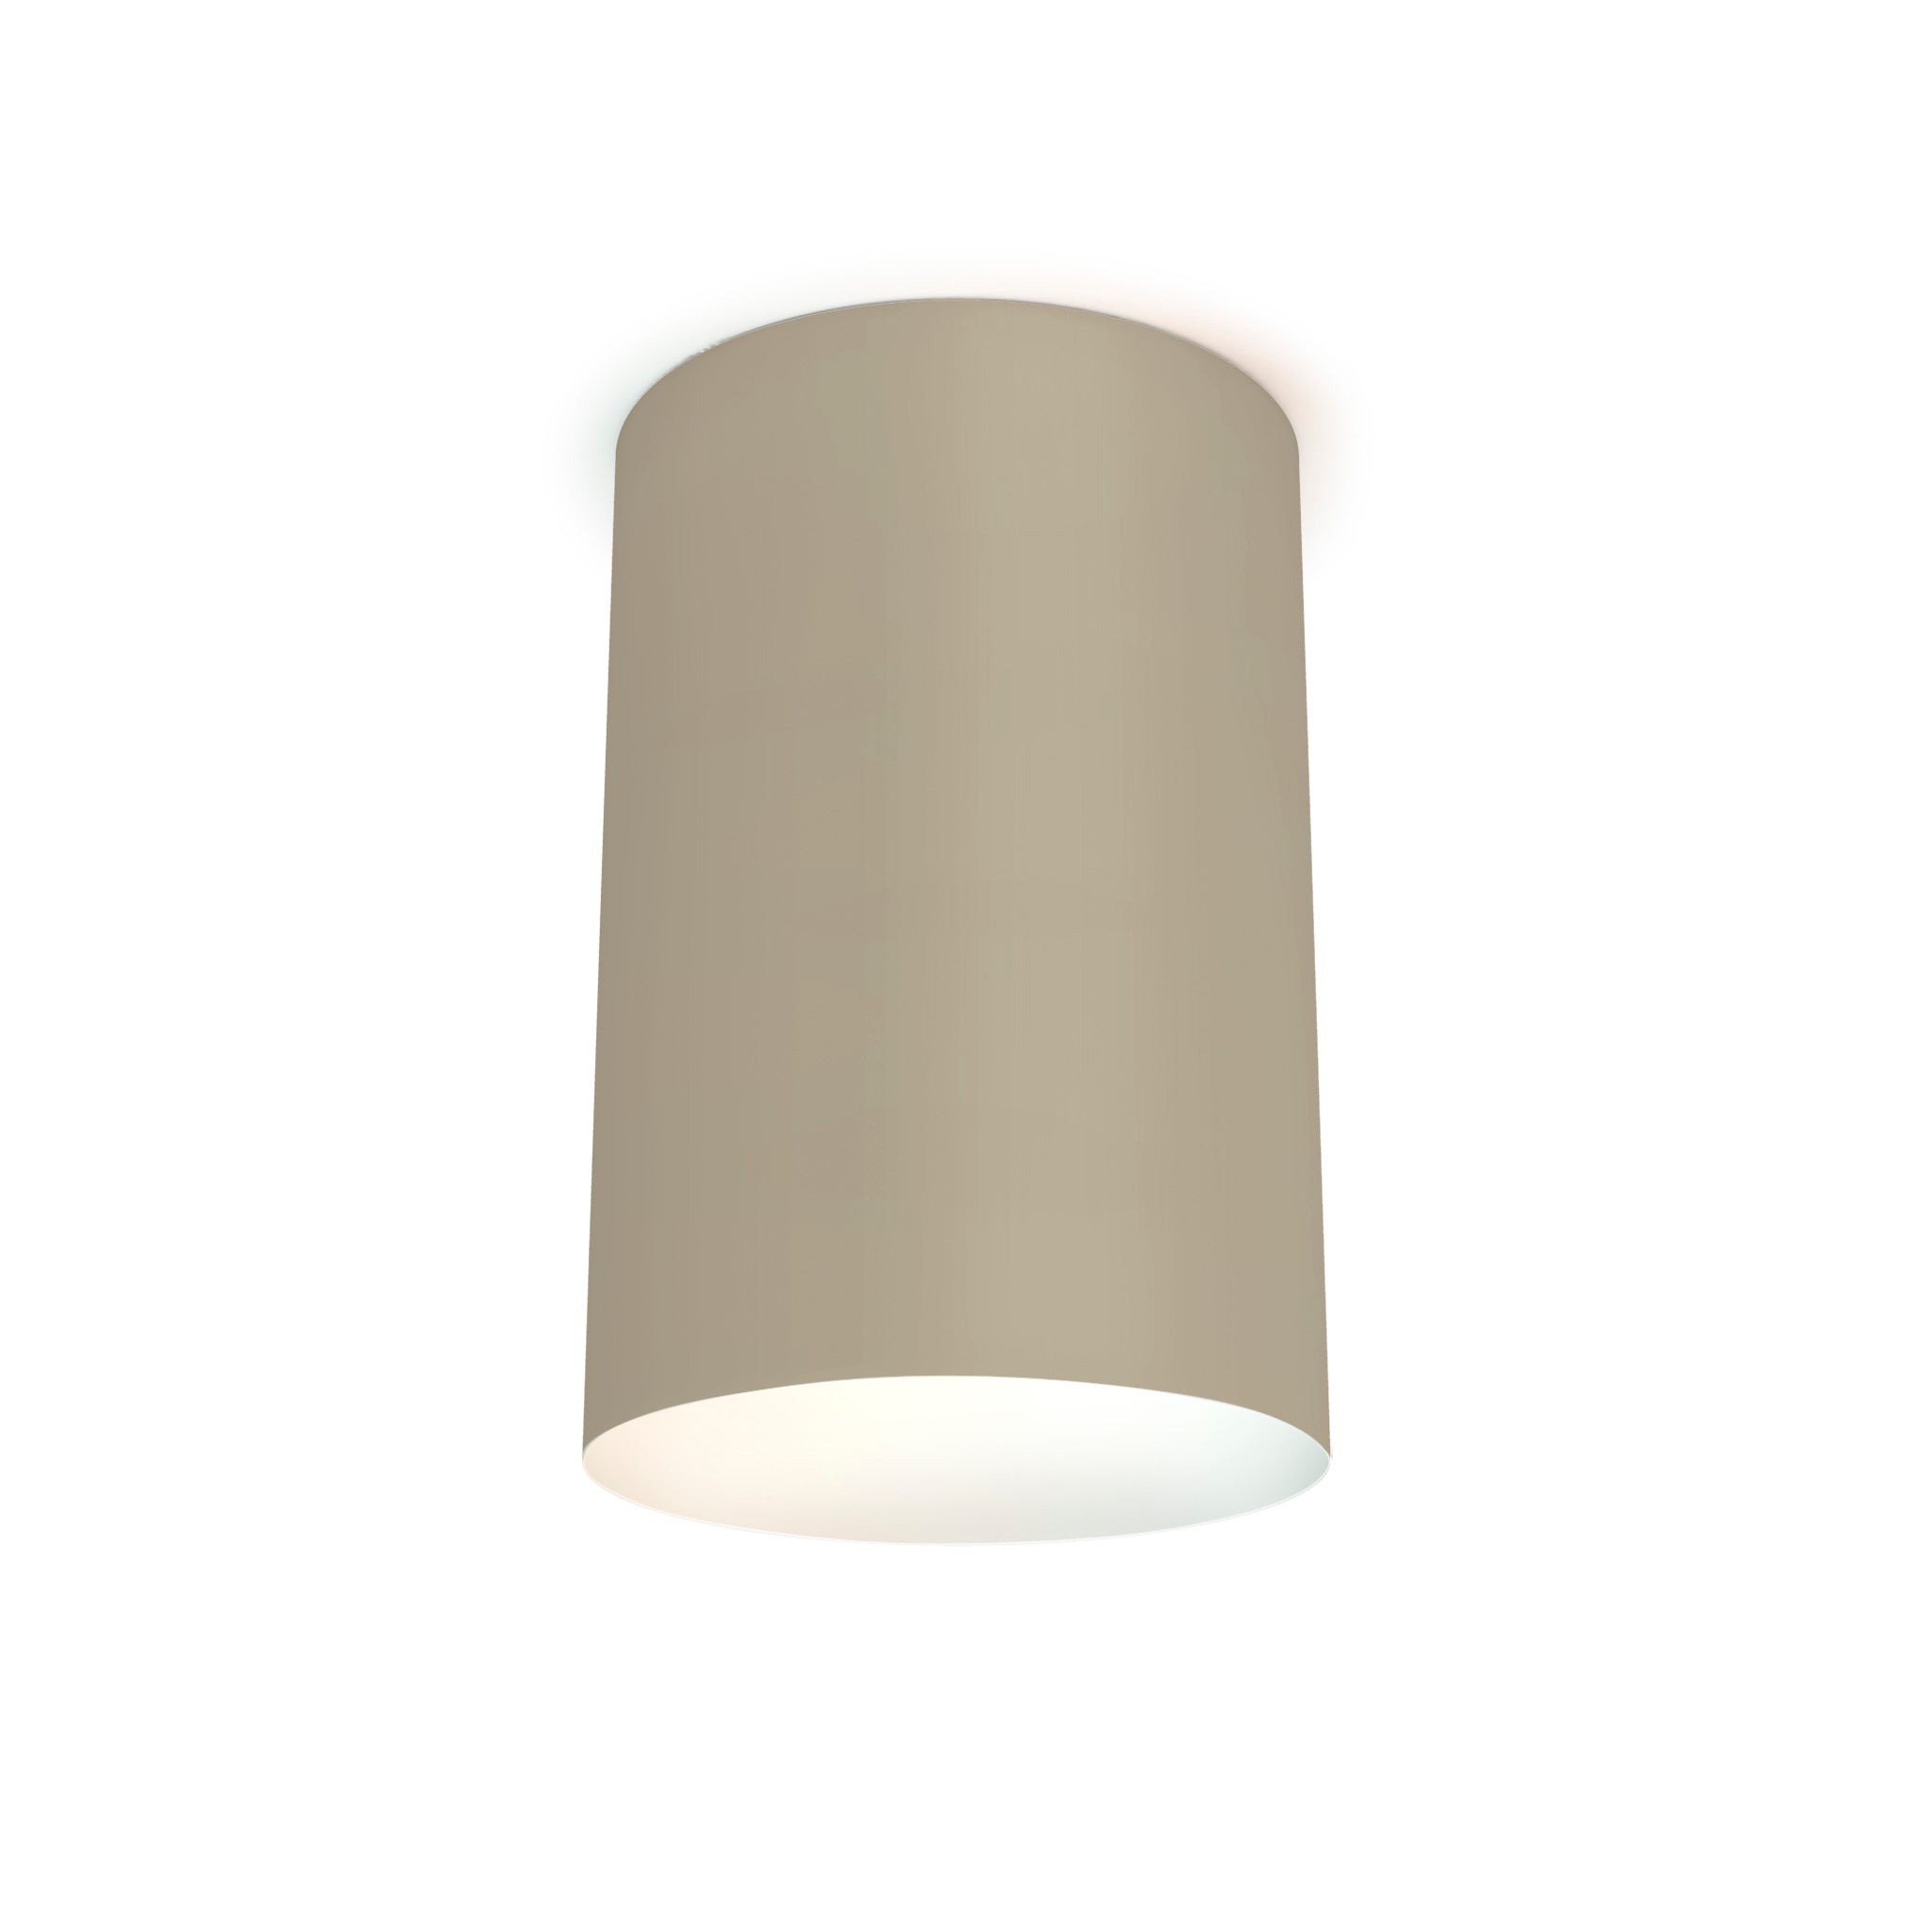 The Lily Flush Mount from Seascape Fixtures in linen, tan color.